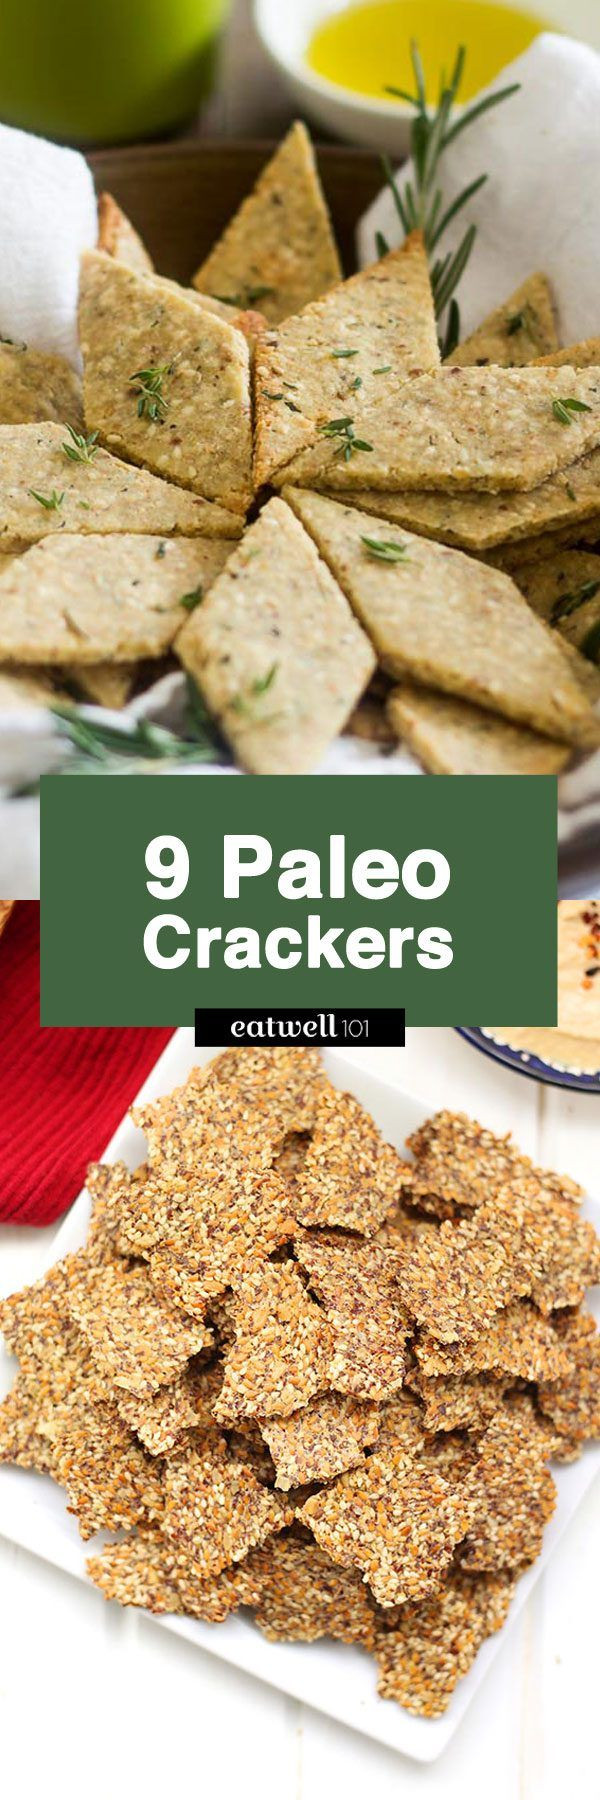 Paleo Crackers Recipes
 9 Paleo Crackers That Will Make You Snack Right